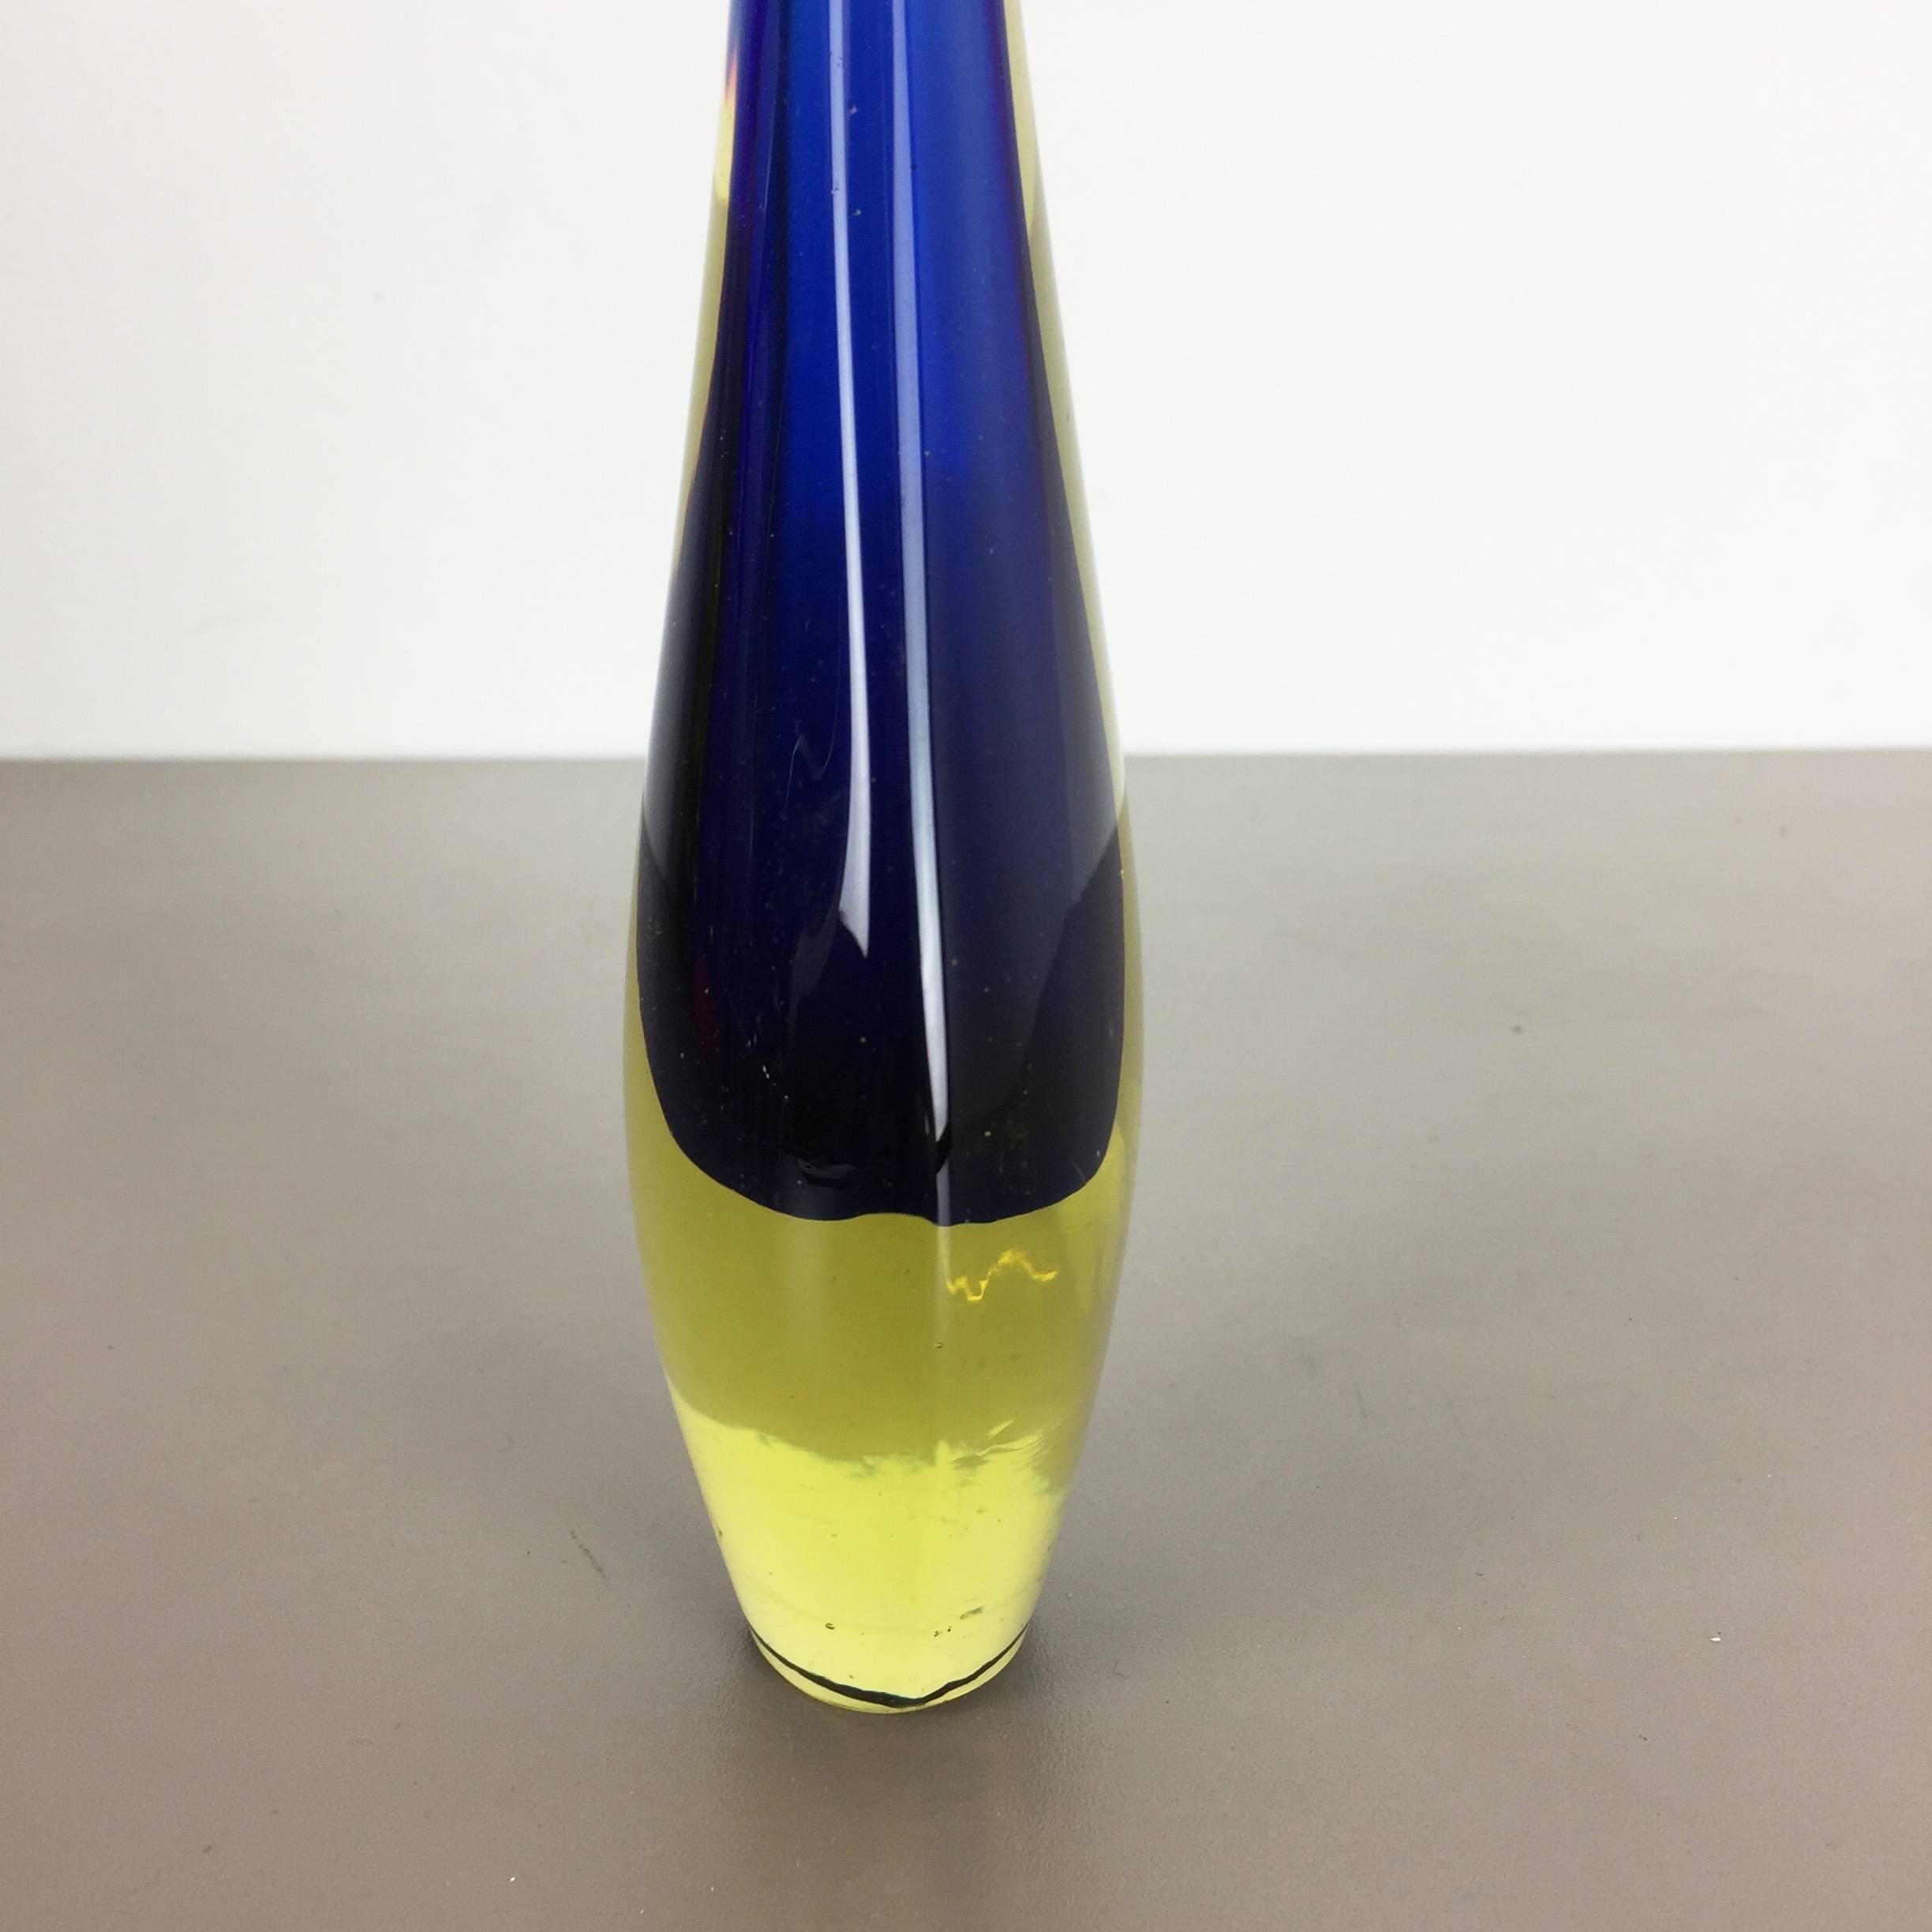 German Small 1960s Murano Glass Sommerso Single-Stem Vase by Flavio Poli, Italy For Sale